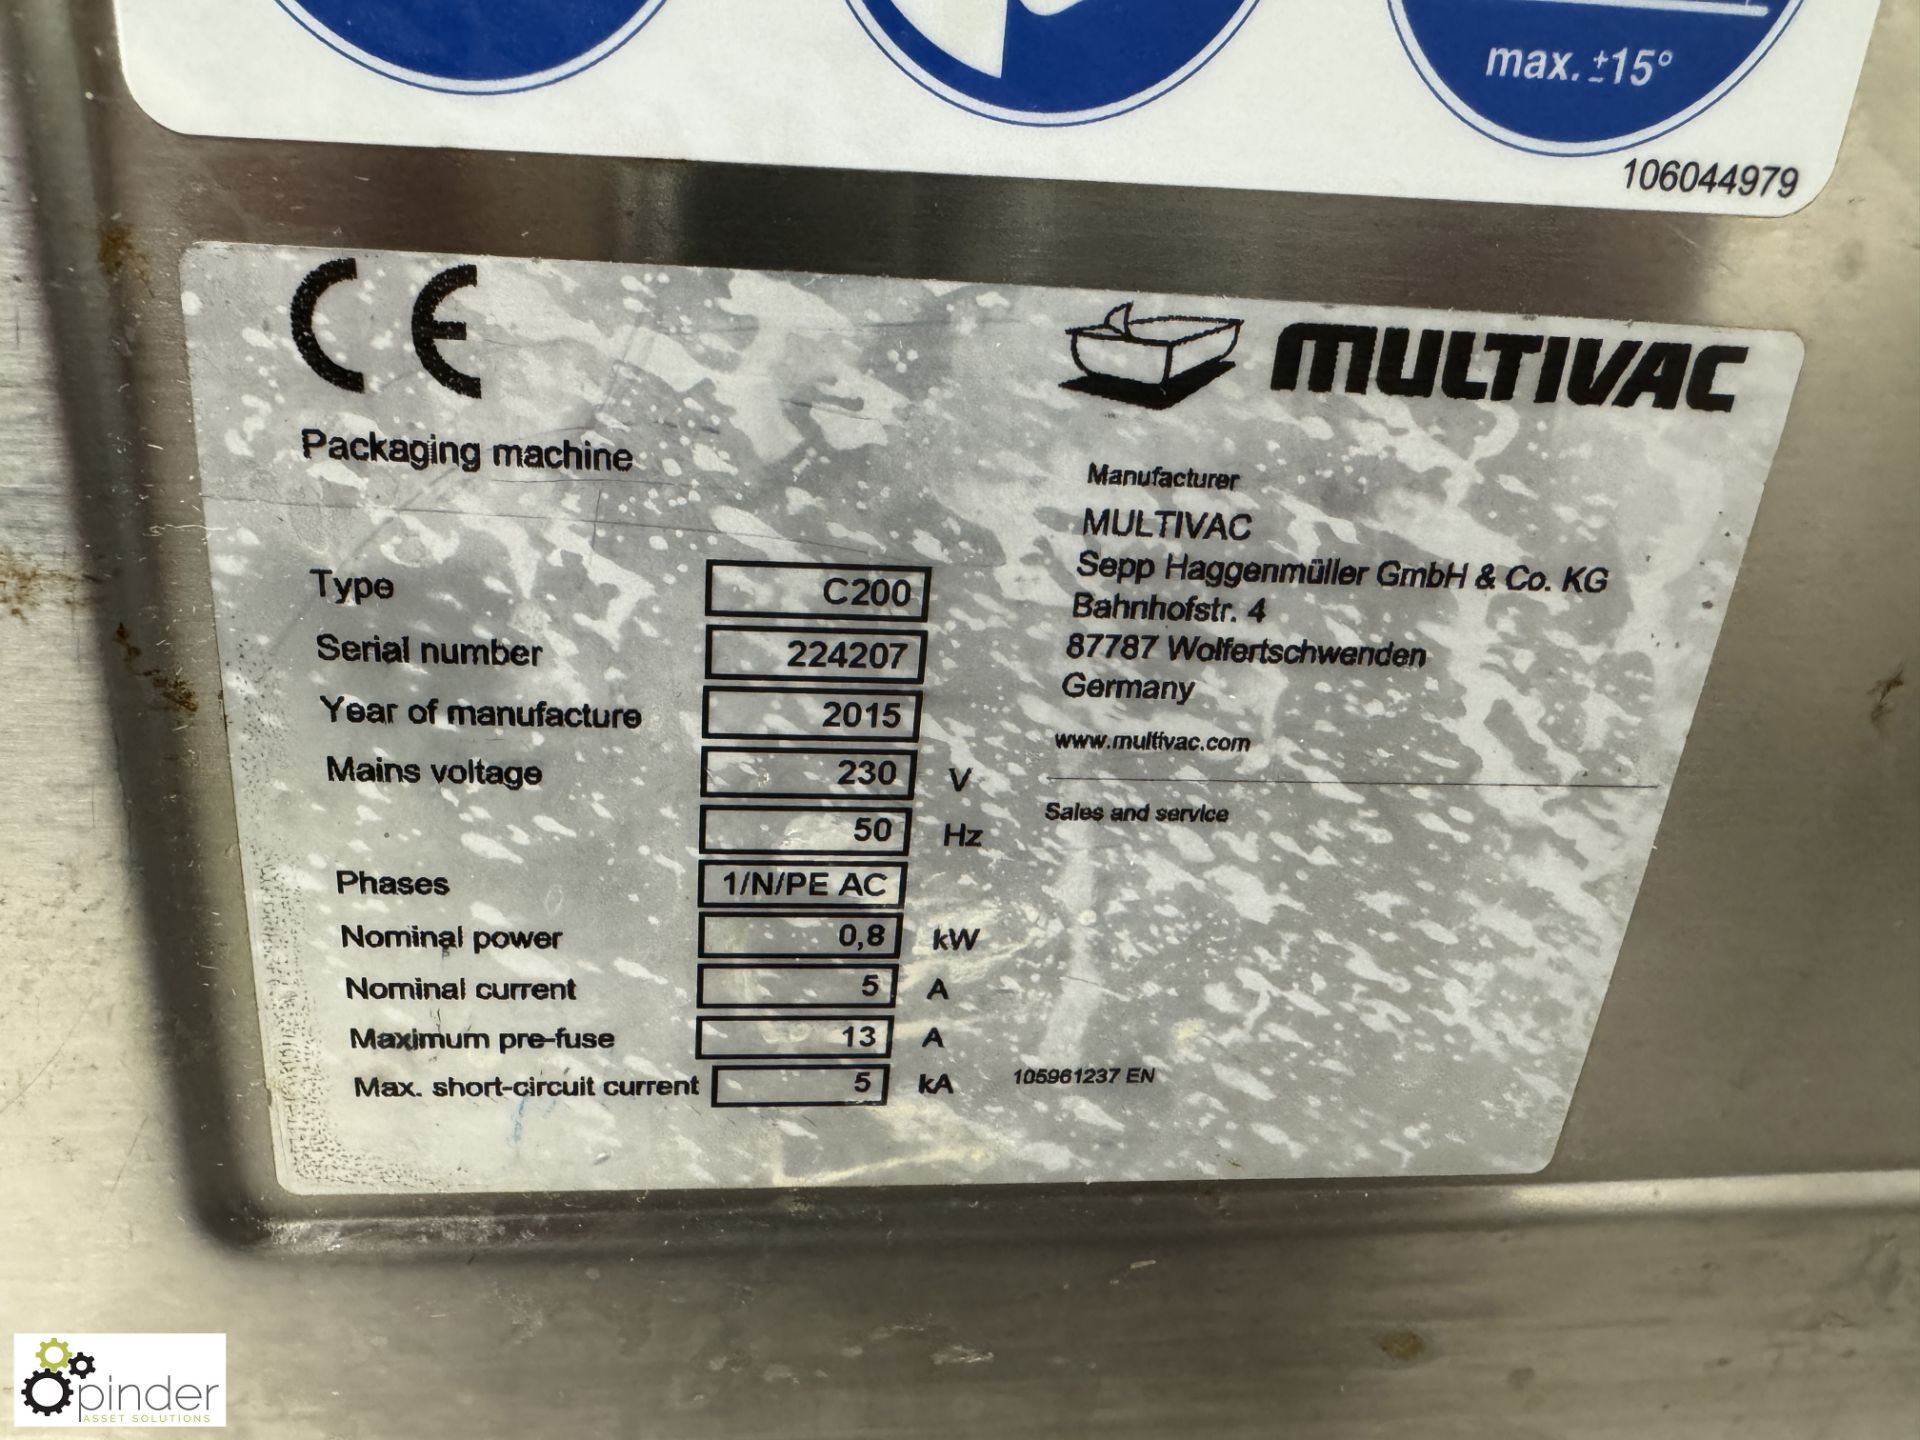 Multivac C200 counter top Vacuum Packer, 240volts, year 2015 (location in building – basement - Image 4 of 6